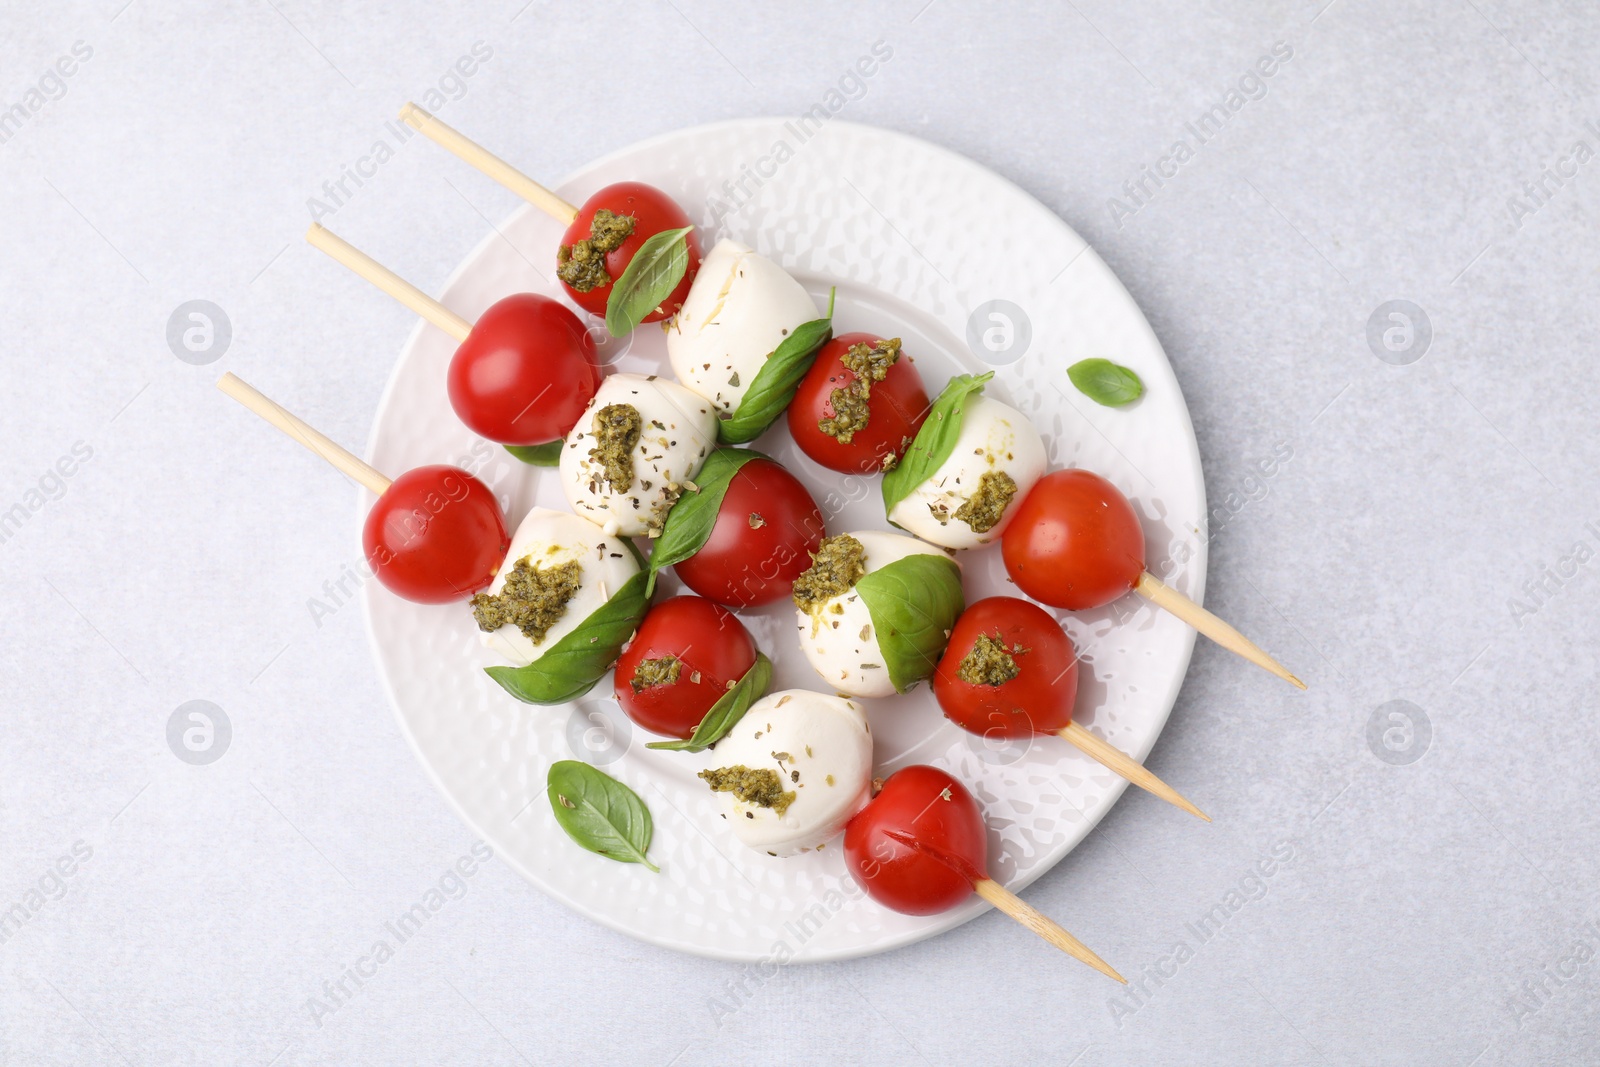 Photo of Caprese skewers with tomatoes, mozzarella balls, basil and pesto sauce on white table, top view